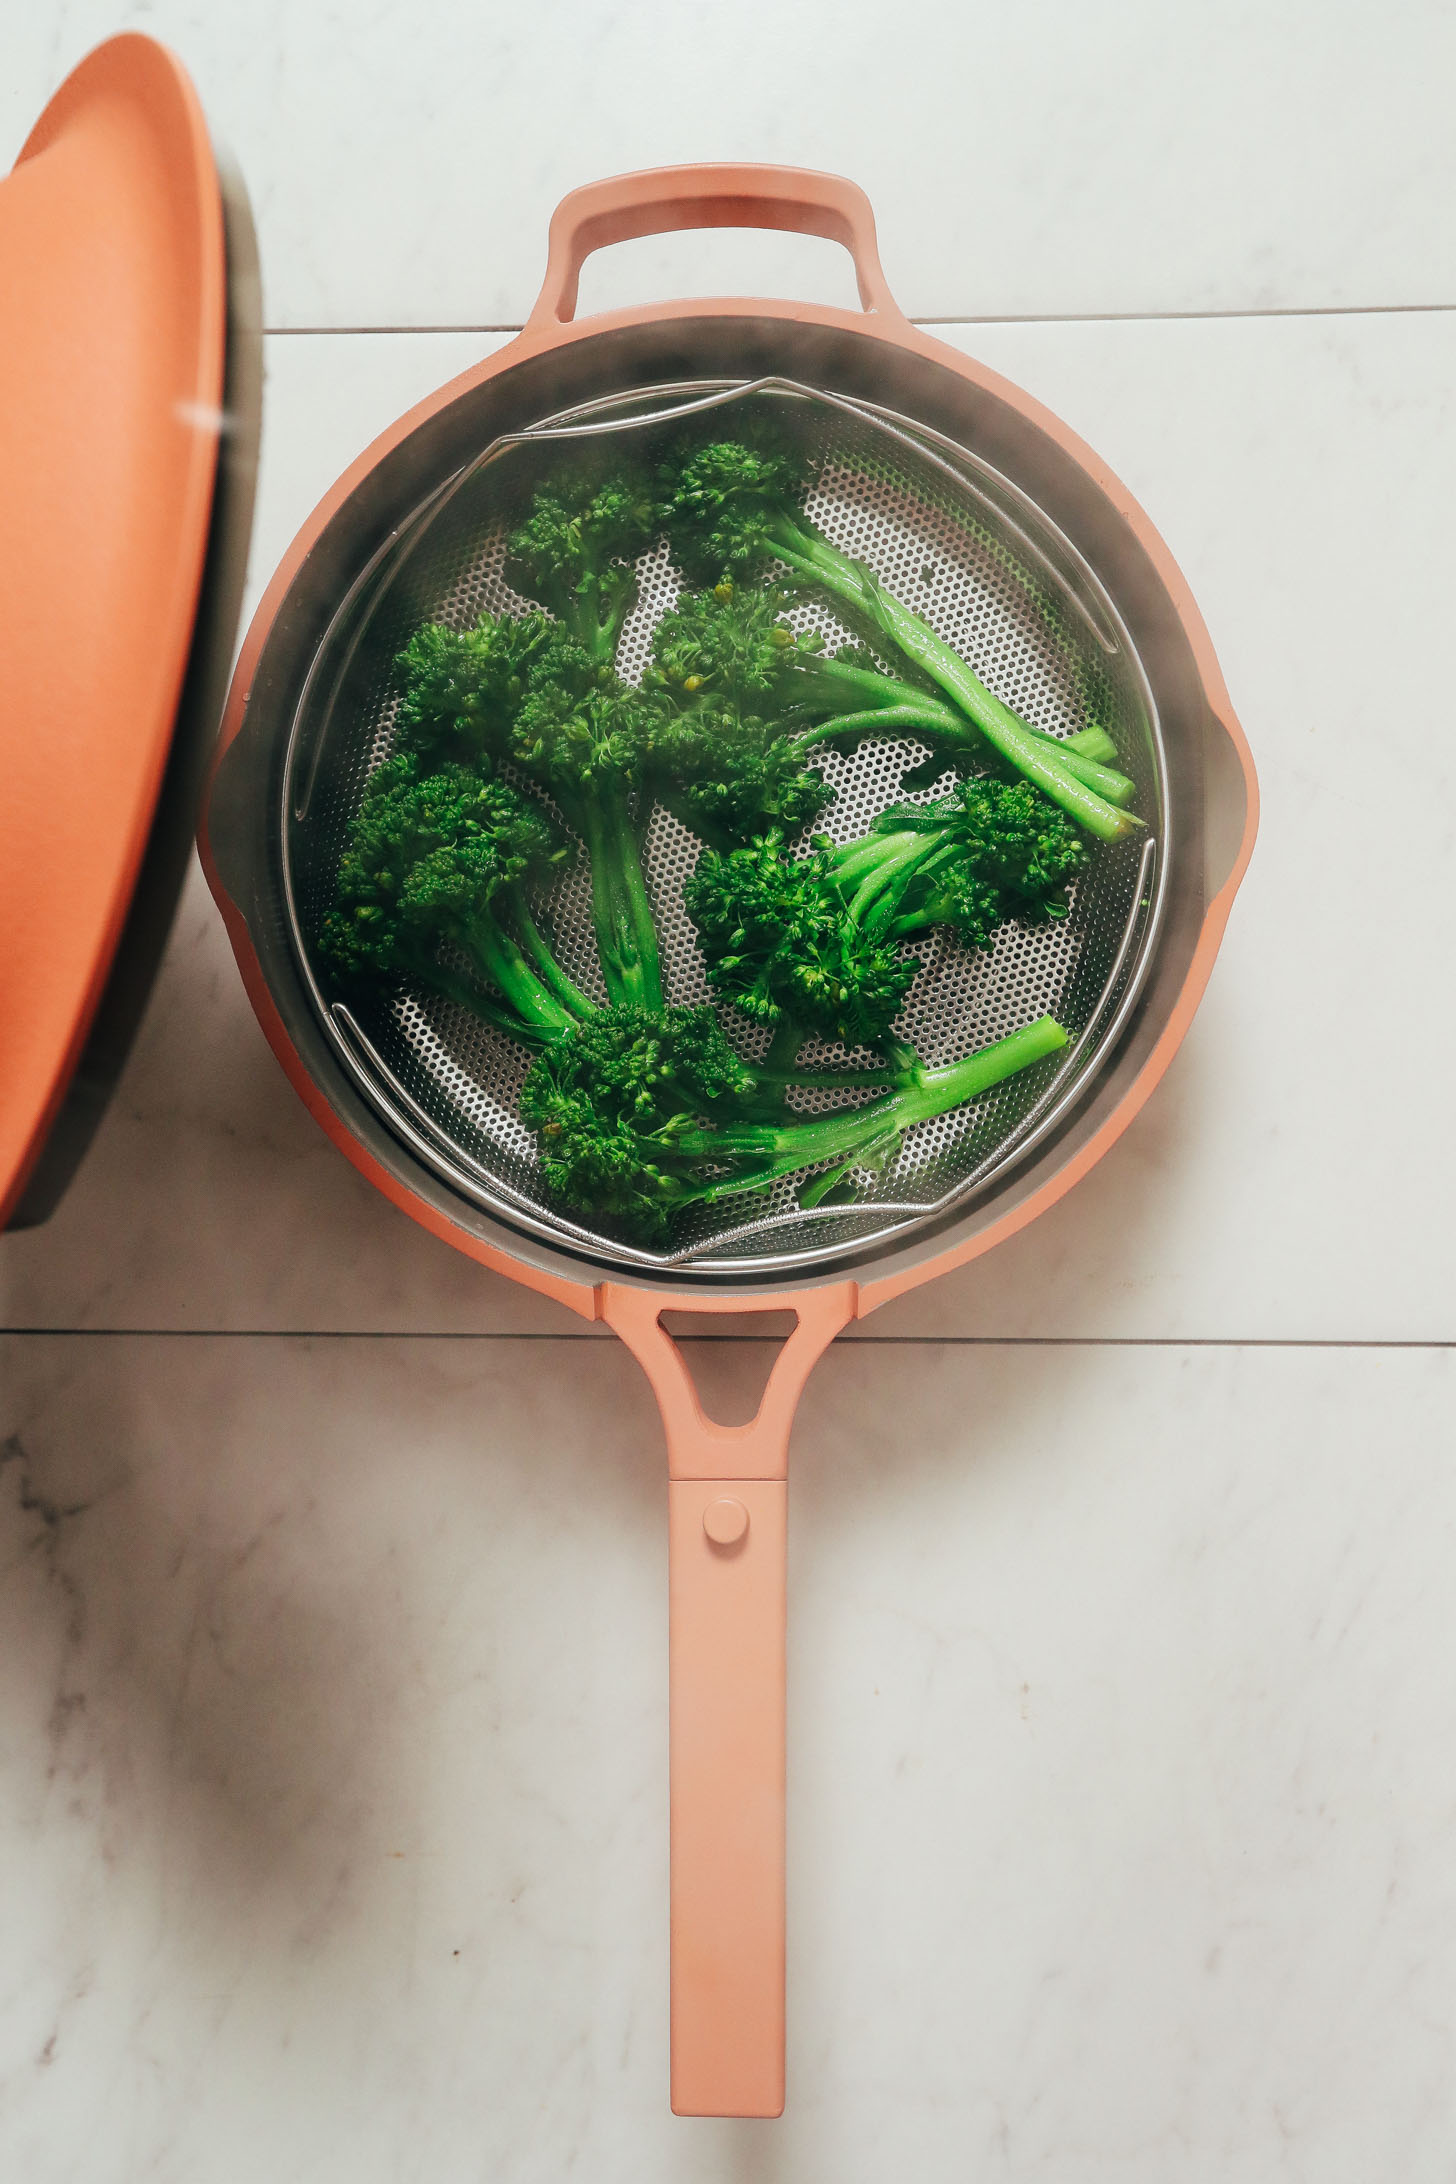 Steaming broccoli in the Always Pan